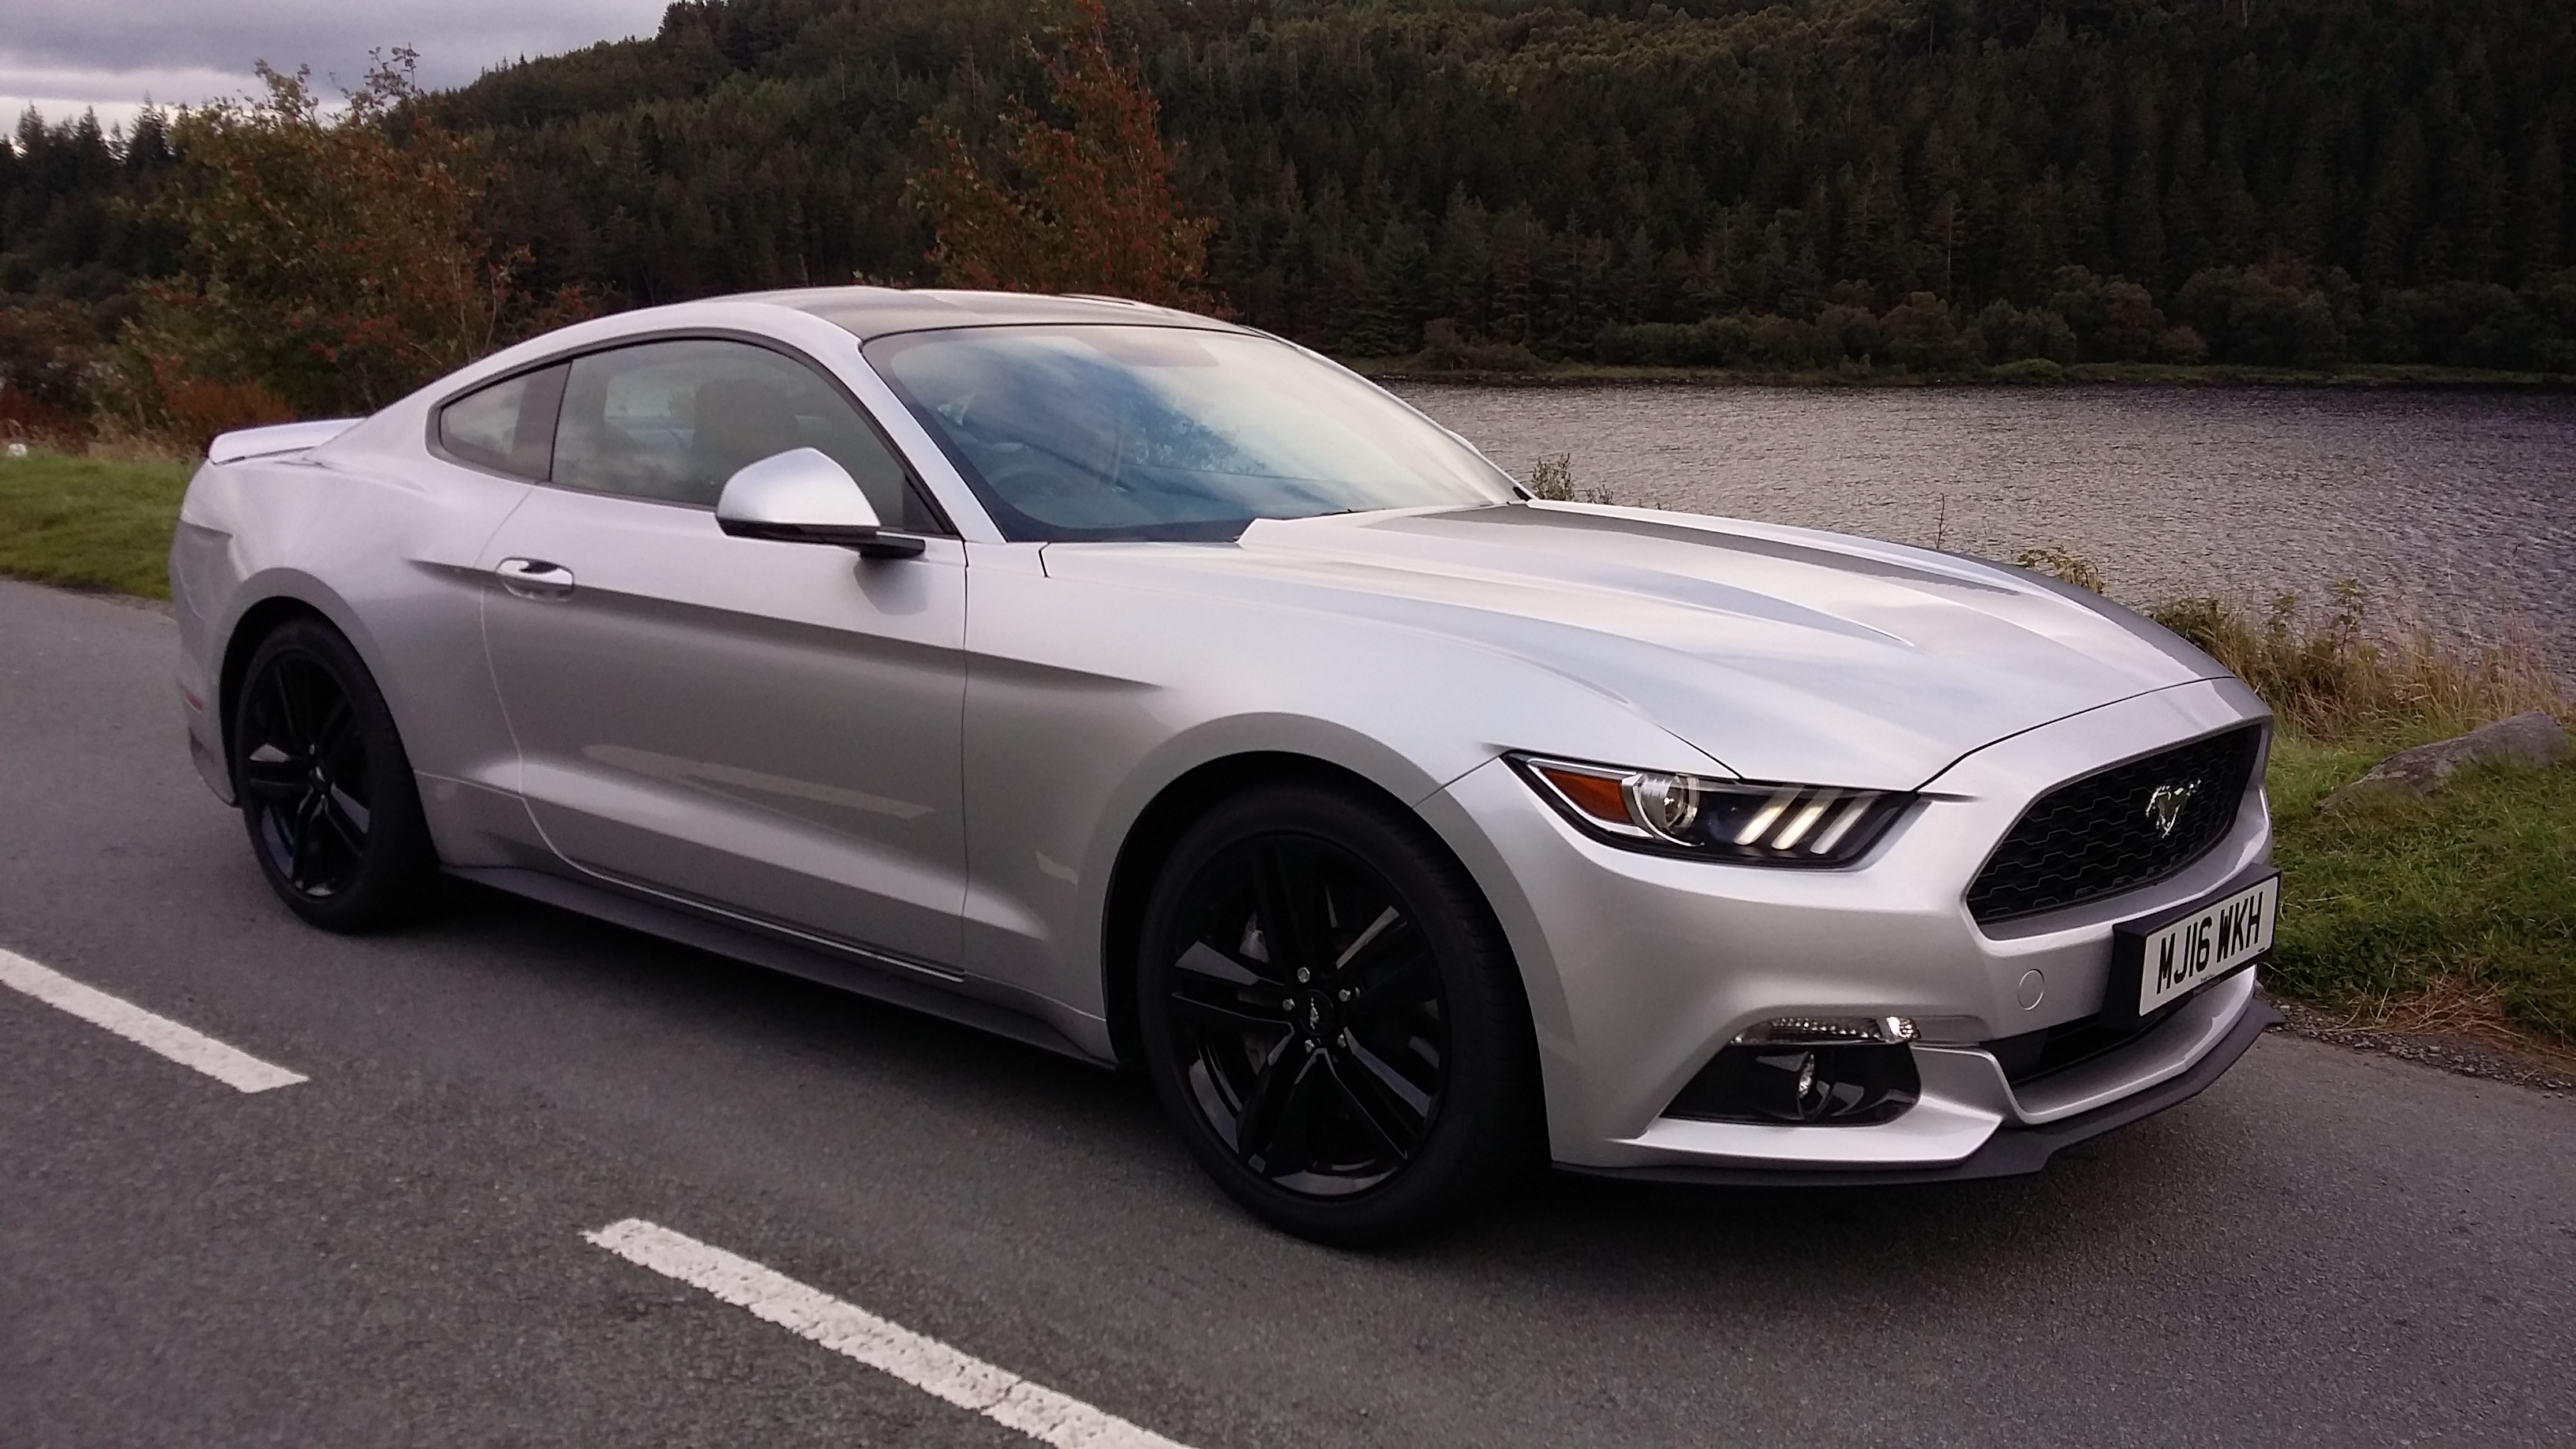 So who has ordered the new S550 Mustang? - Page 145 - Mustangs - PistonHeads